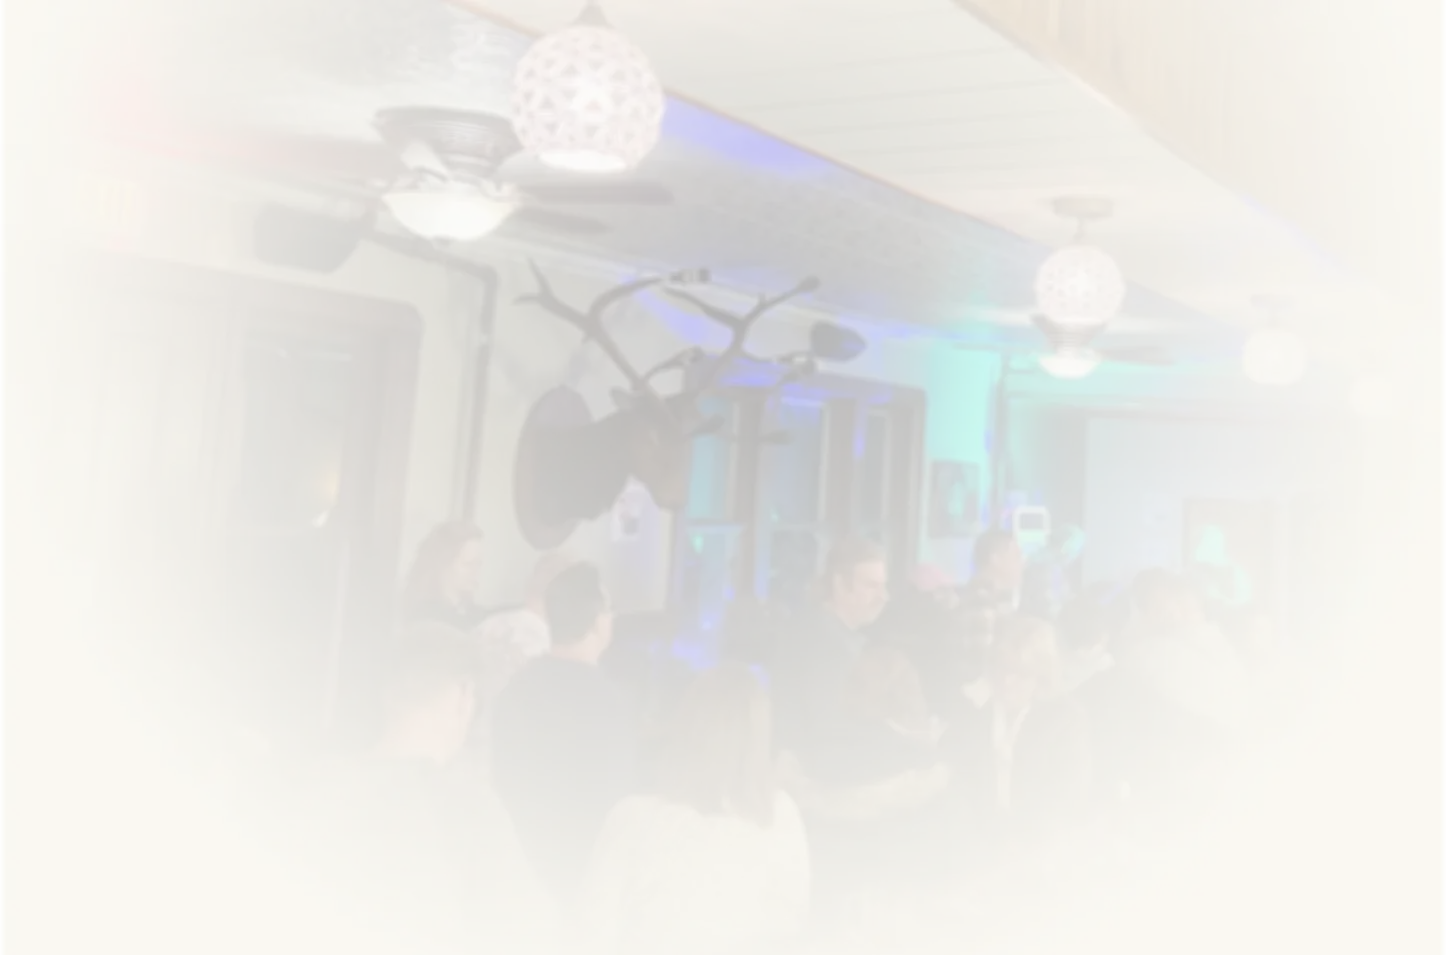 Background photo of people at the bar area of The Social